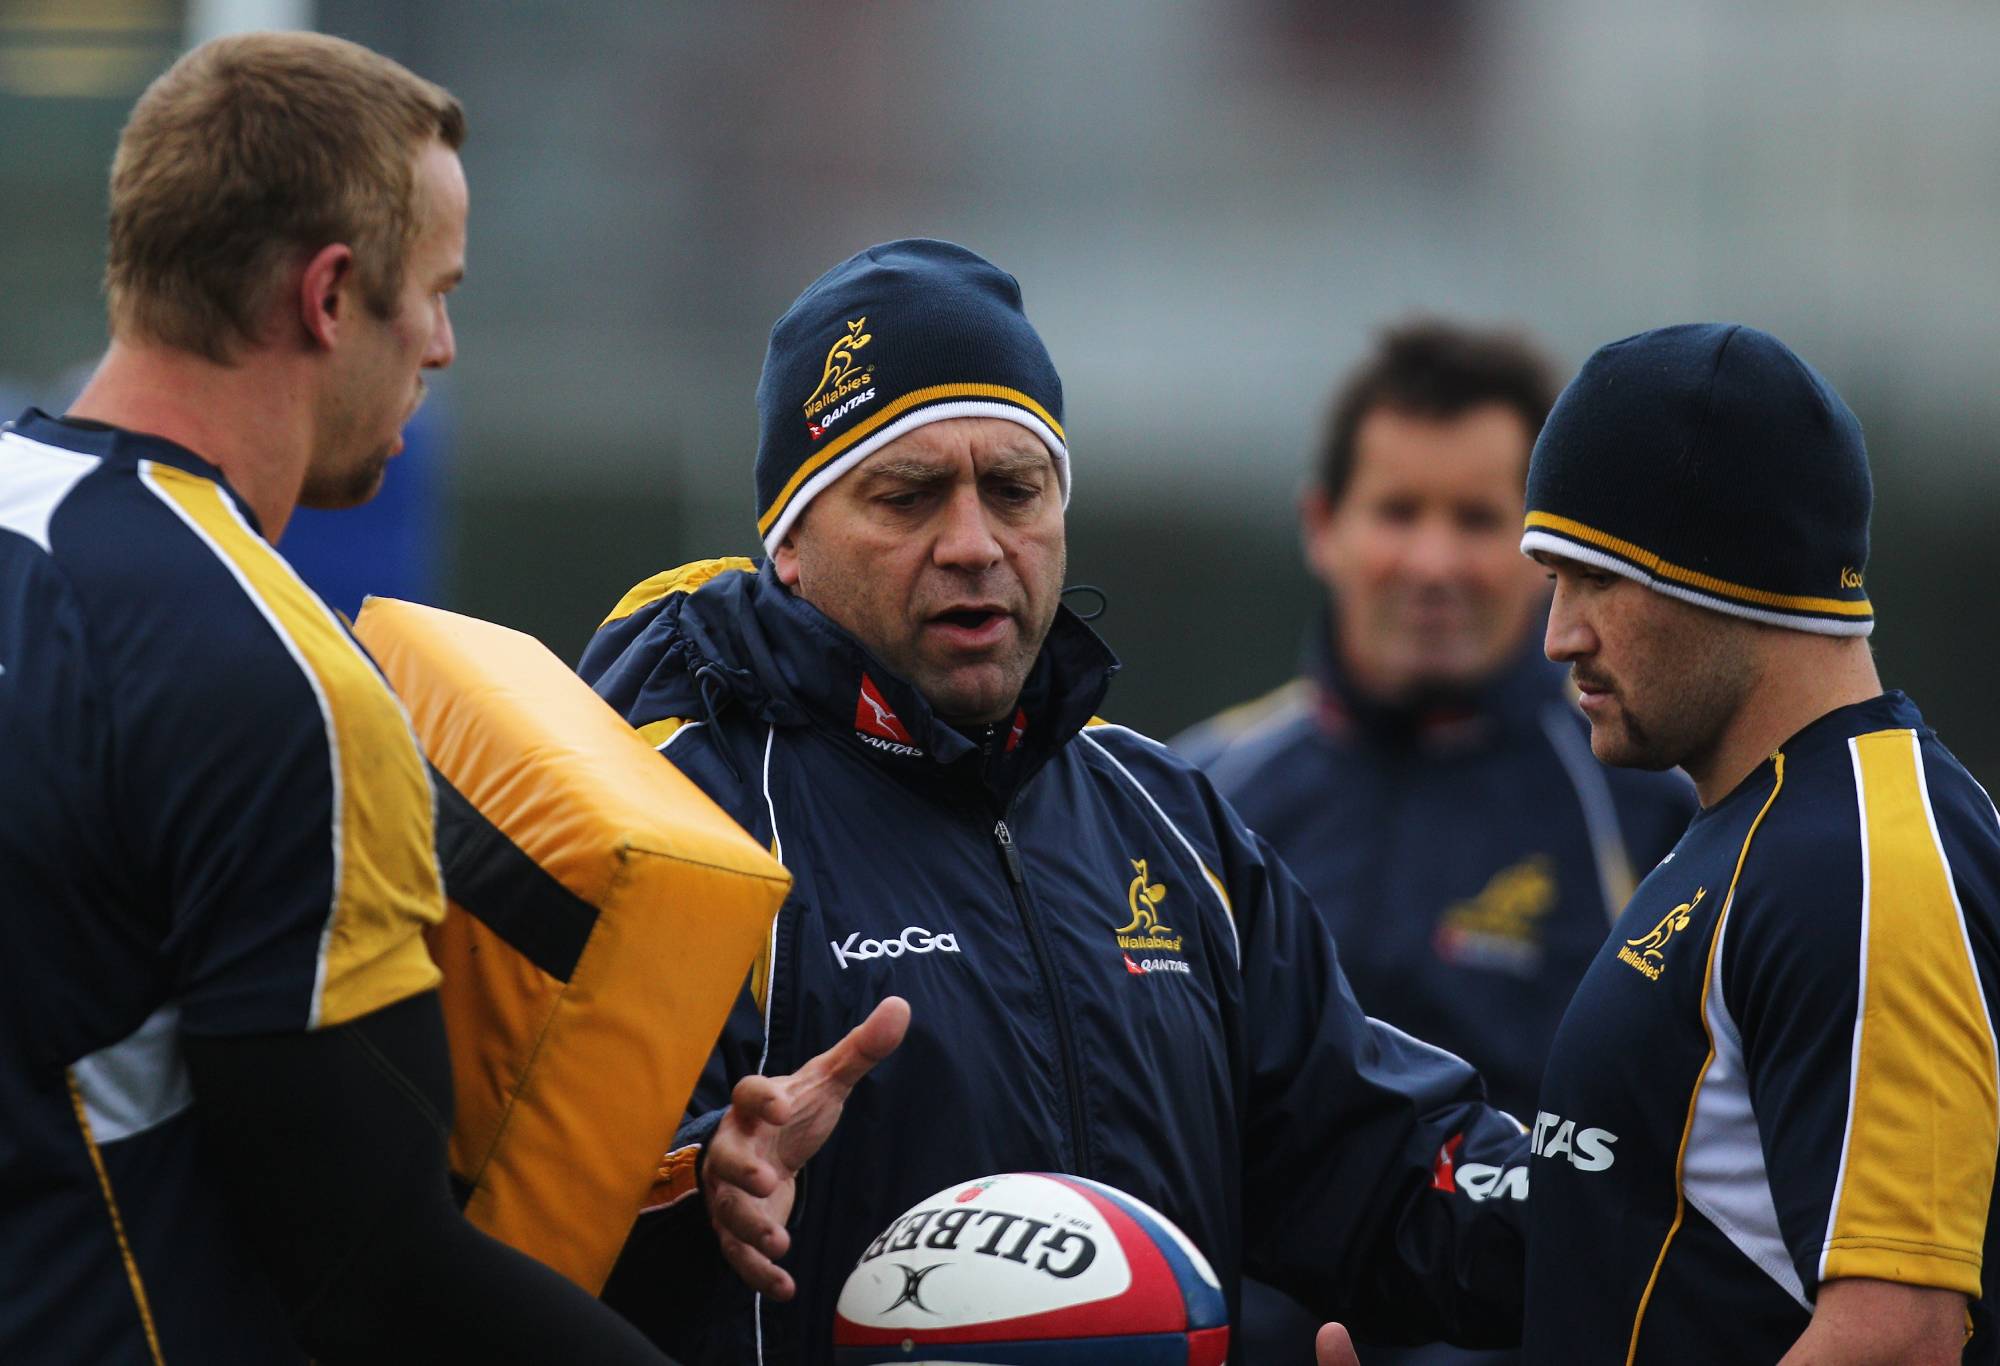 Assistant Coach, David Nucifora speaks to Mark Chisholm (L) and Matt Giteau (R) during an Australian Wallabies training session at Latymer Upper School on November 9, 2010 in London, England. (Photo by Dean Mouhtaropoulos/Getty Images)